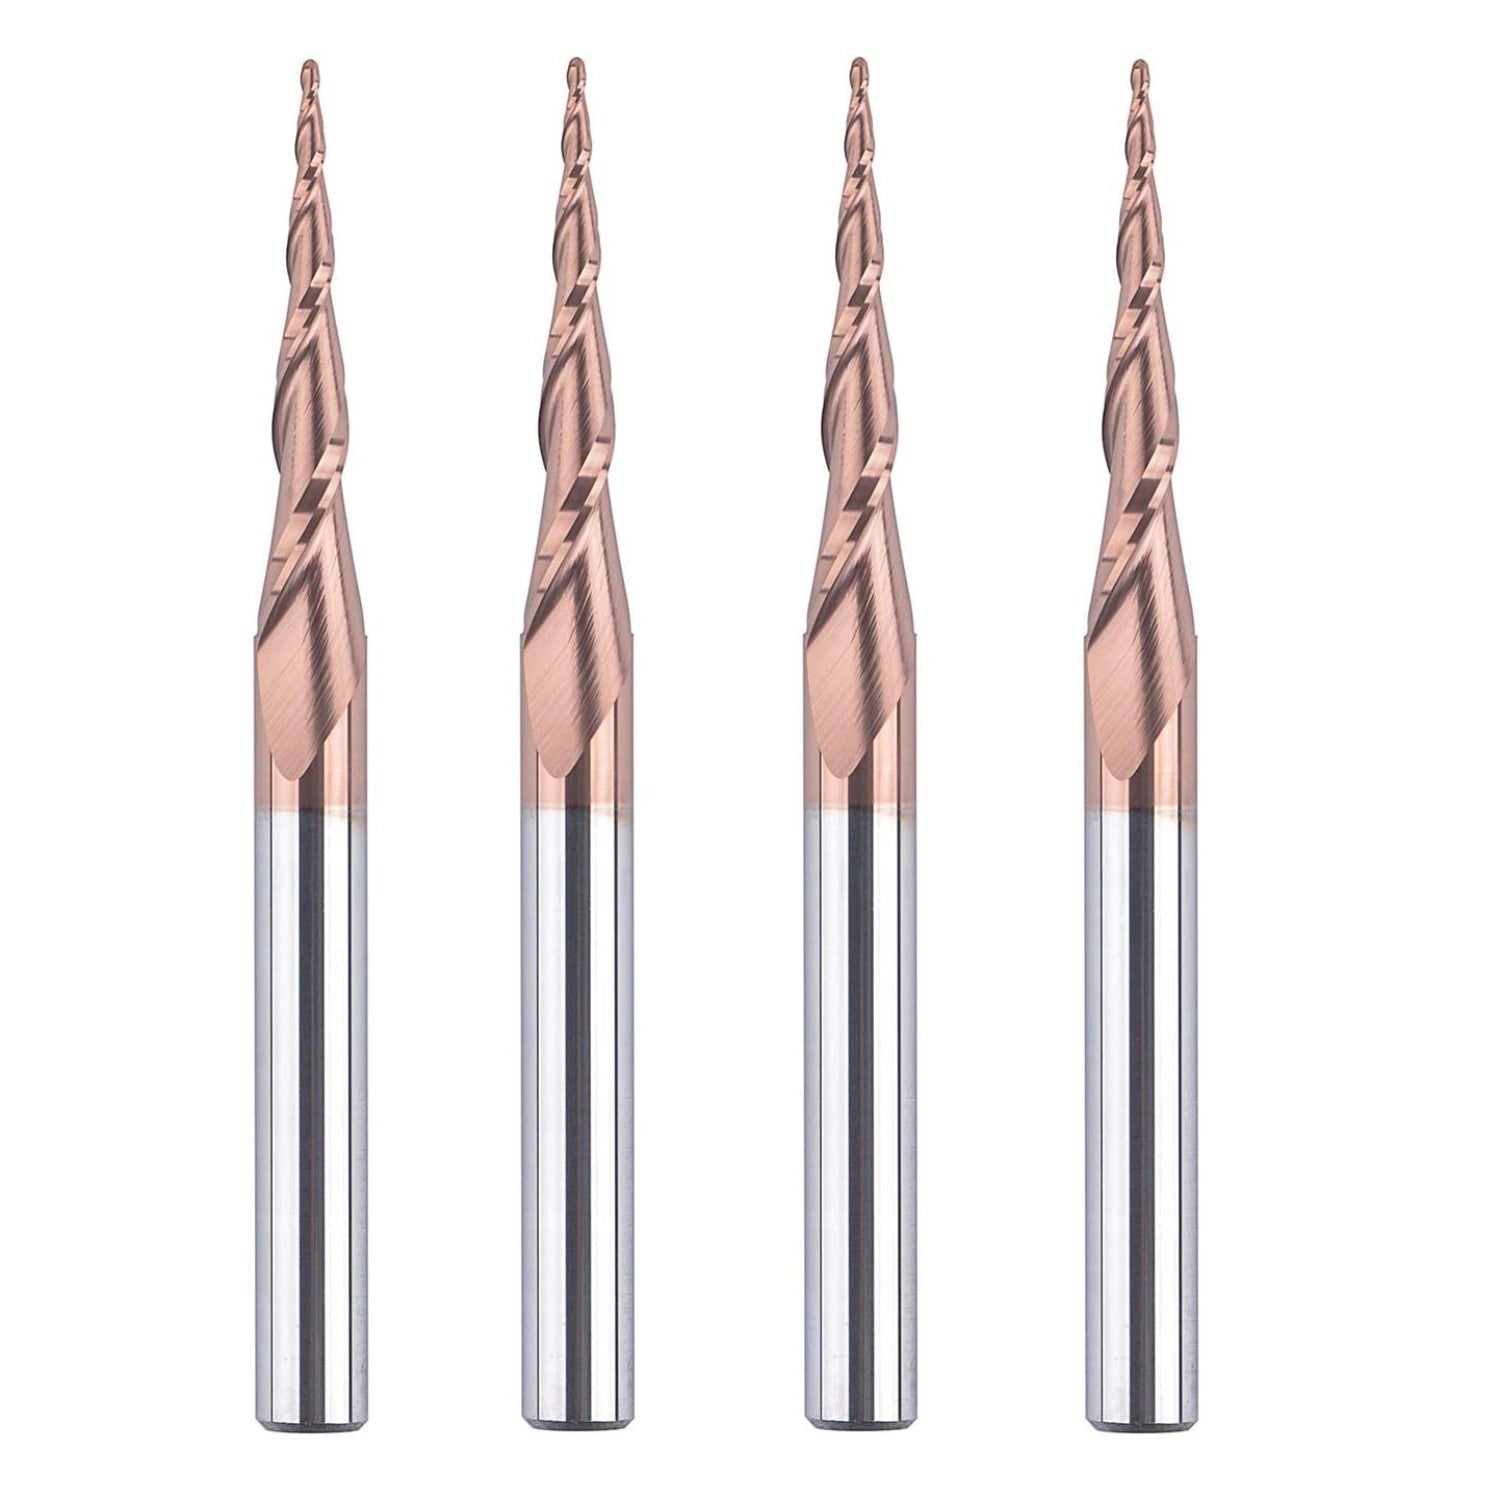 SpeTool W01007 CNC 2D and 3D Carving 4.82 Deg Tapered Angle Ball Nose 0.5mm Radius x 1/4" Shank x 1-1/4" Cutting Length x 3" Long 2 Flute SC H-Si Coated Upcut Router Bit